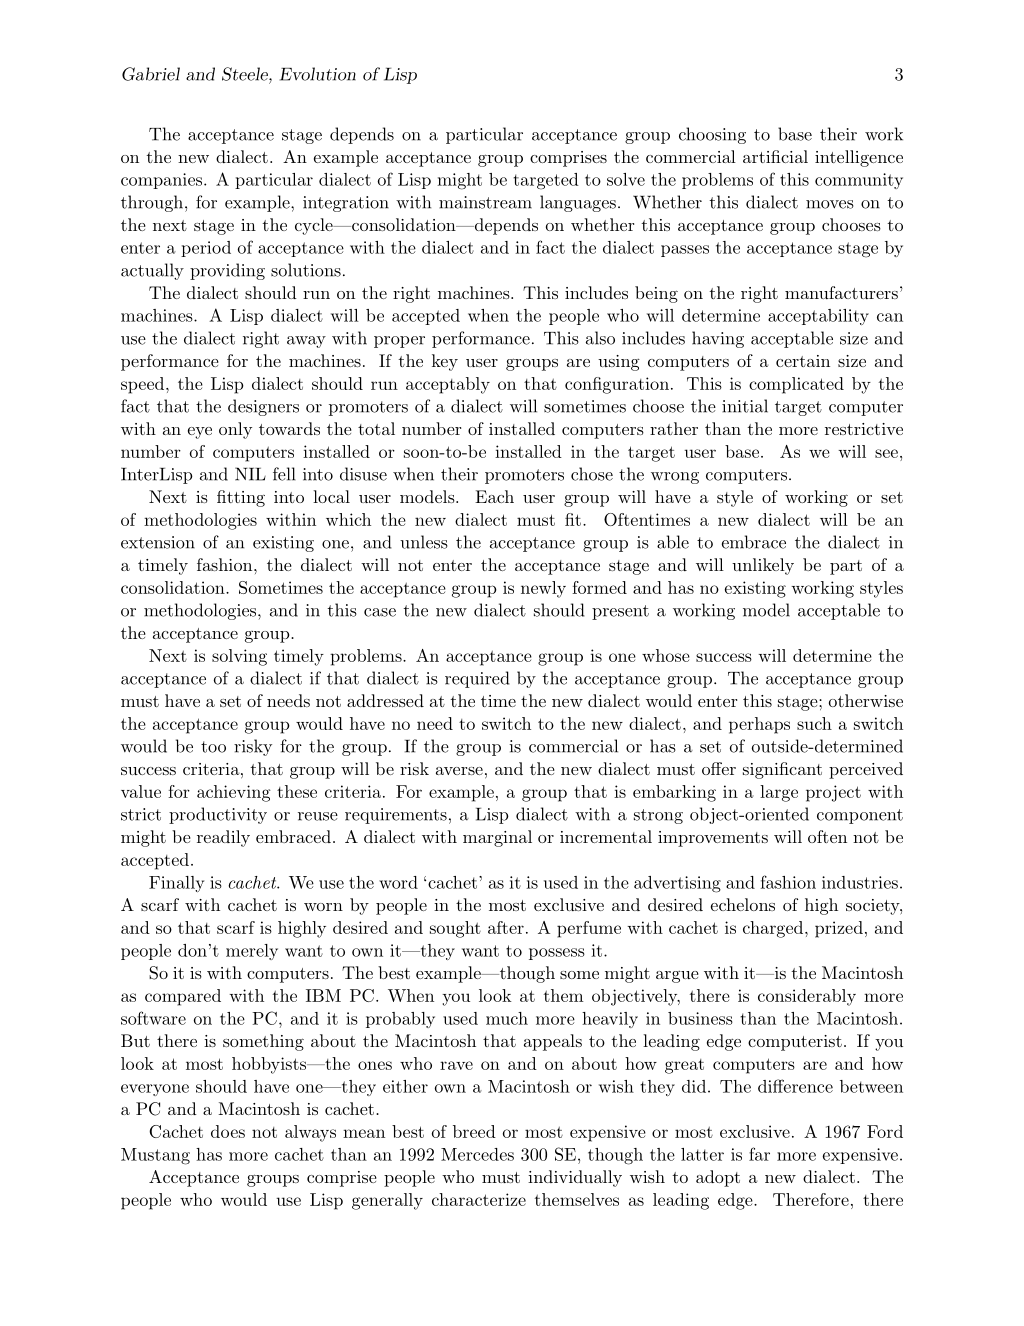 page 3